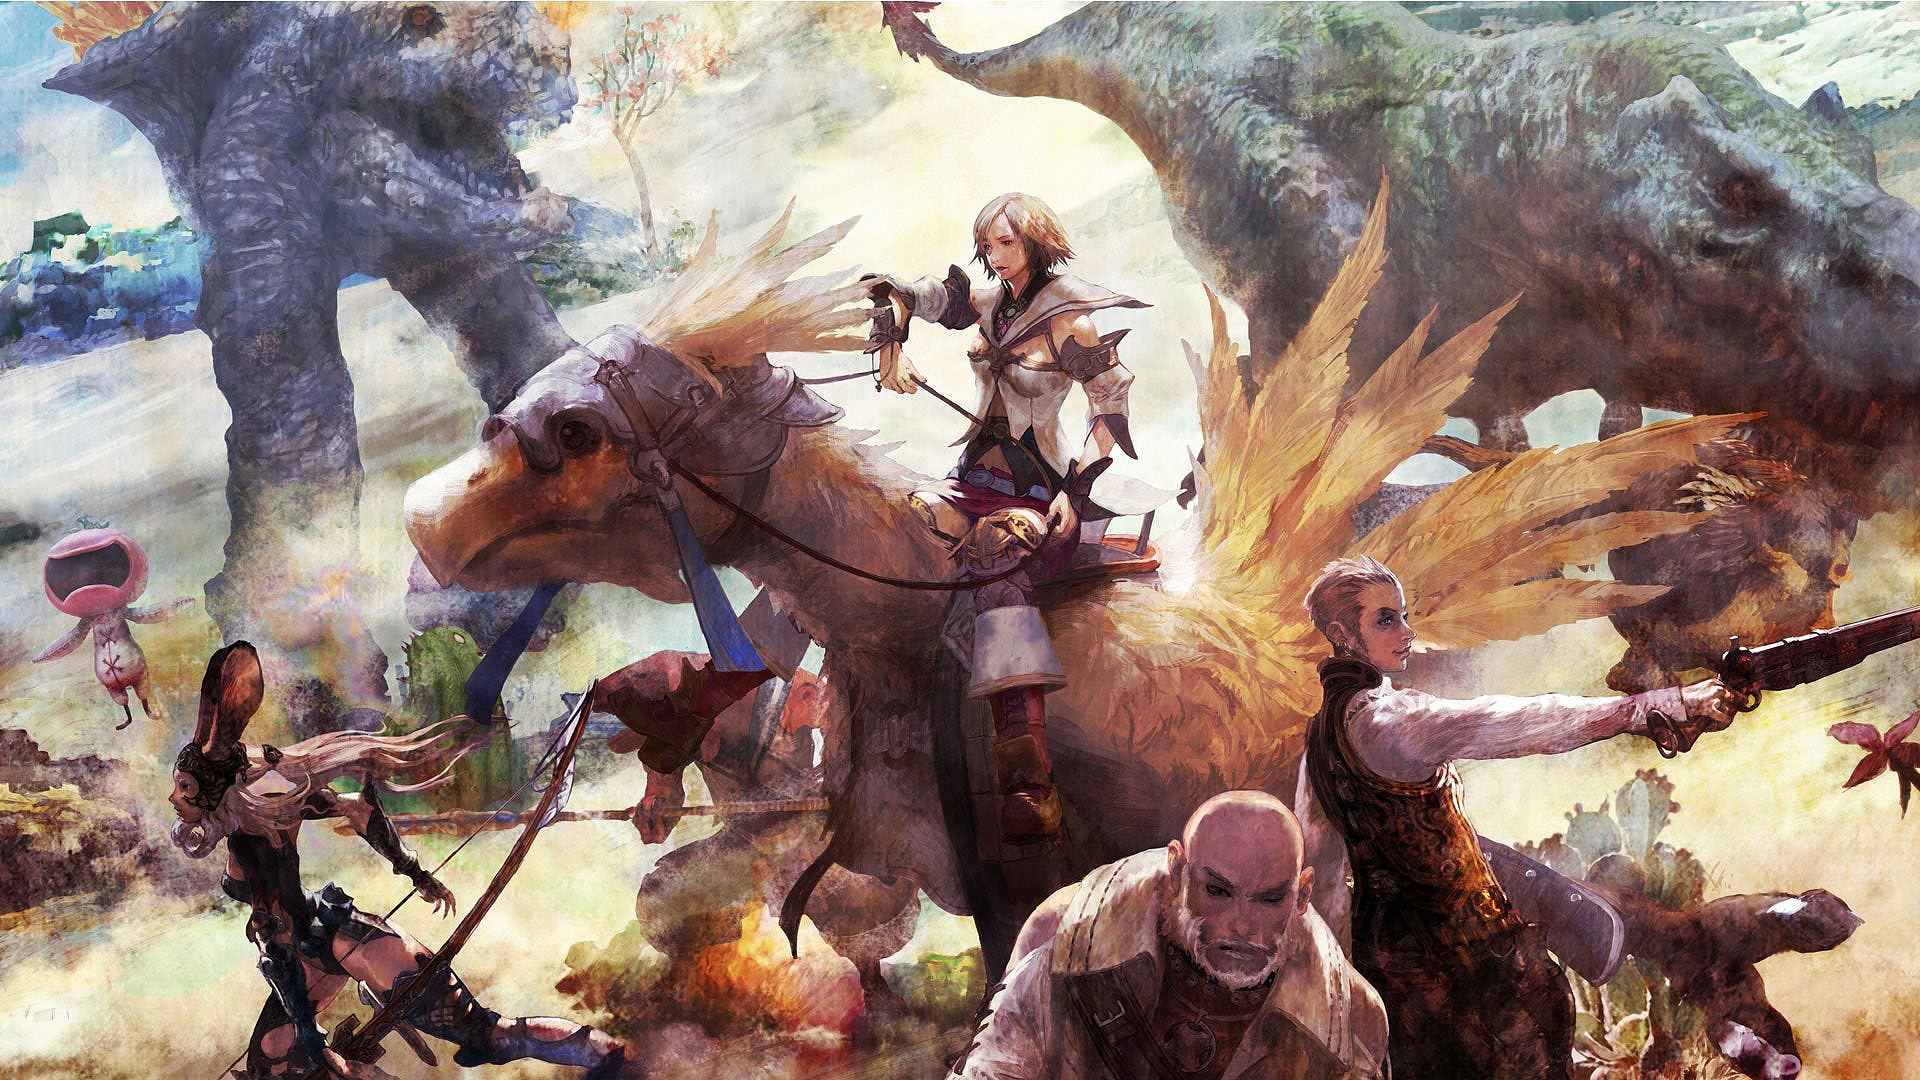 Final Fantasy Xii Video Game Art Artwork Video Game Characters Video Games Square Enix JRPGs Fantasy 1920x1080